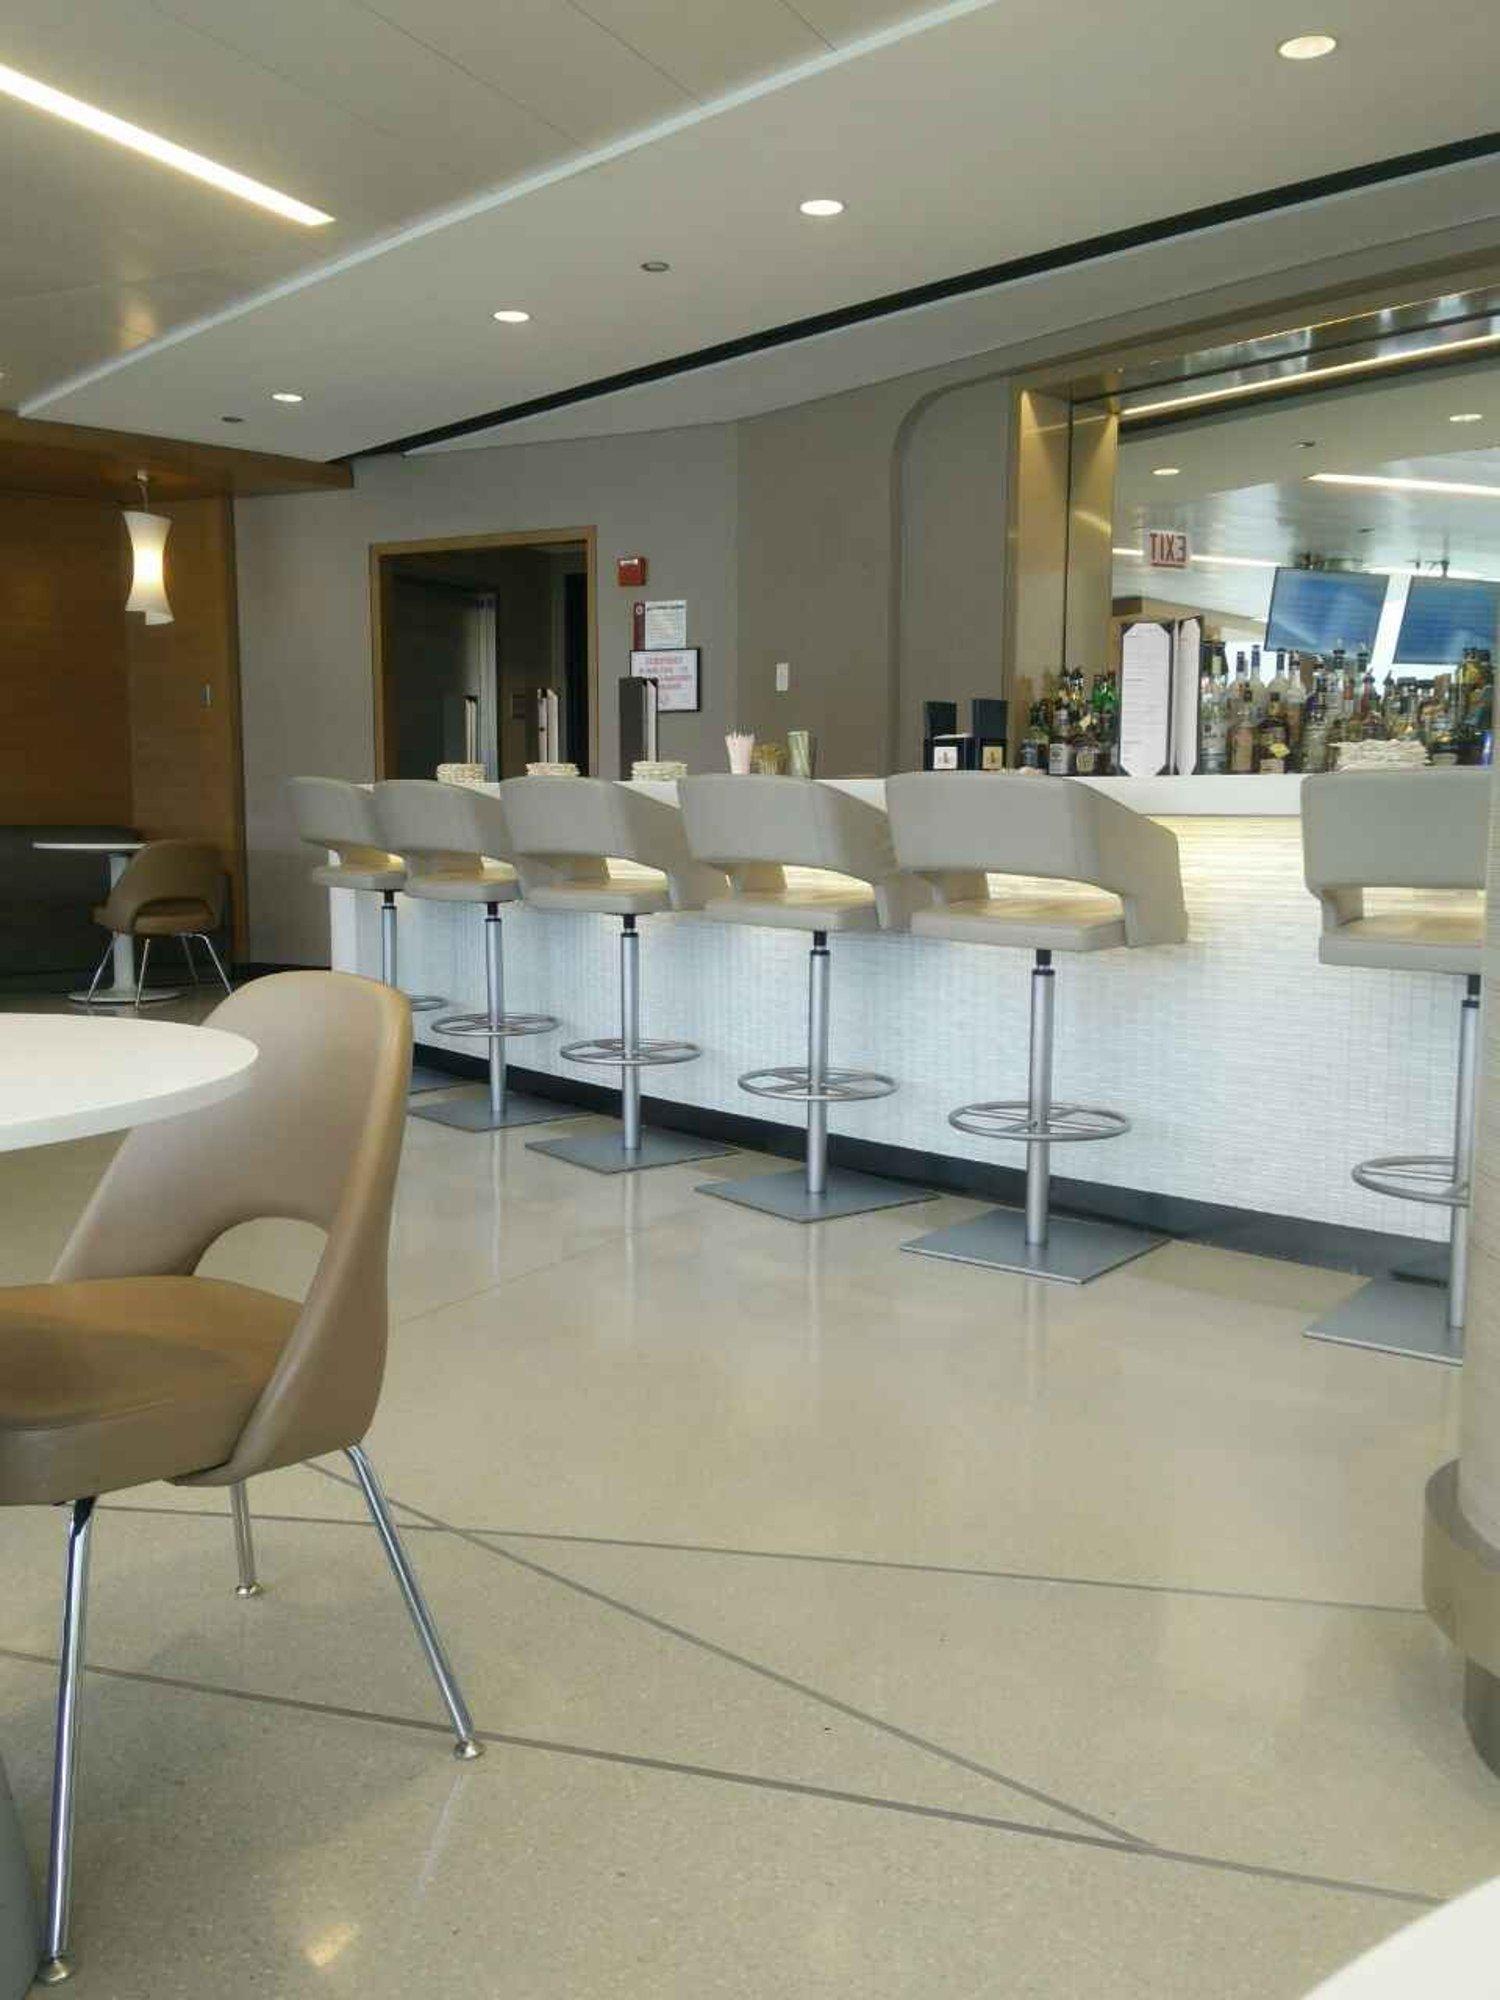 How to get access to American Airlines' Admirals Club lounges